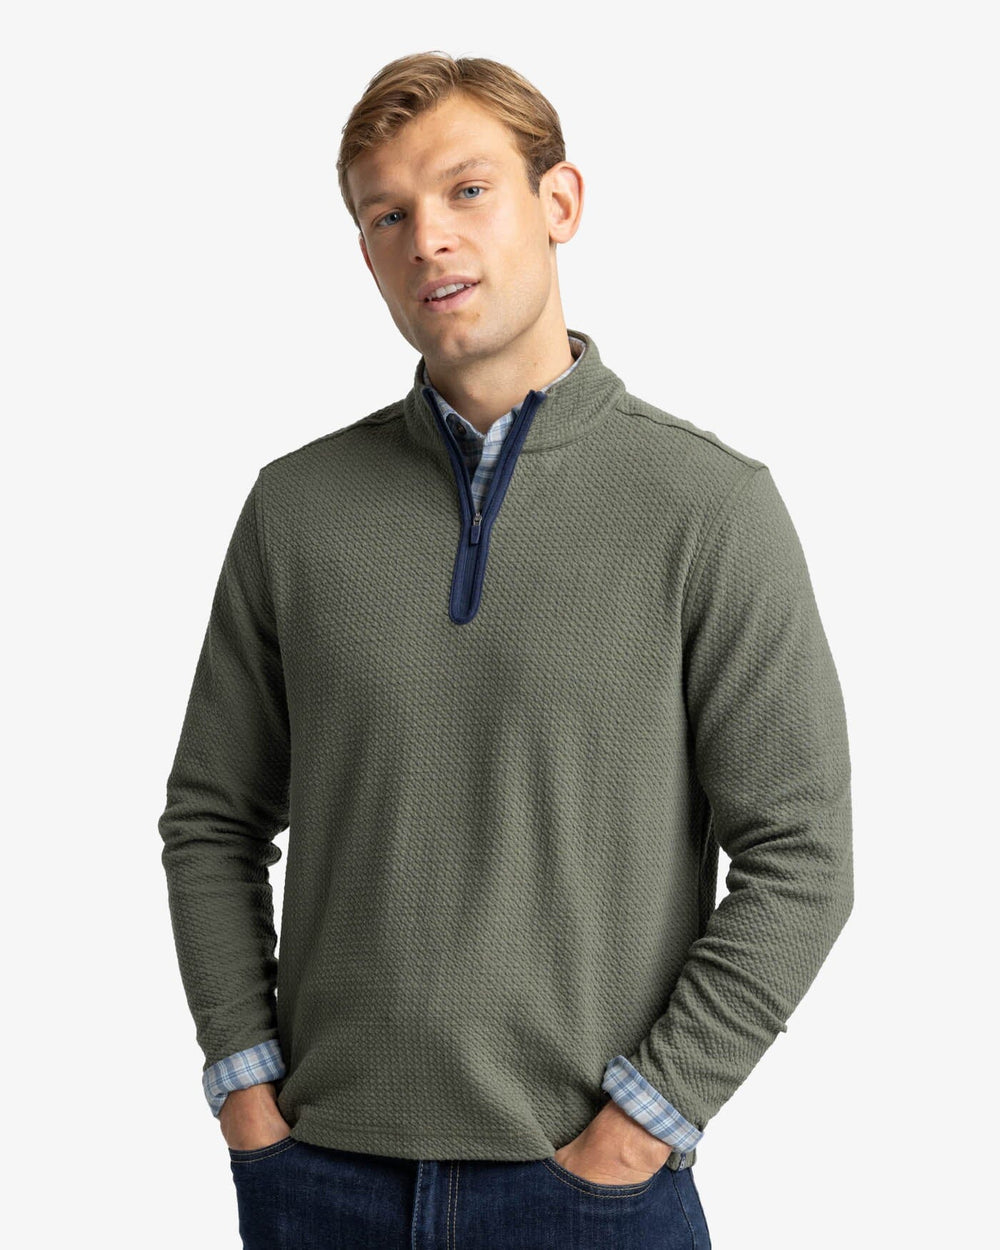 The front view of the Southern Tide Heather Outbound Quarter Zip by Southern Tide - Heather Gulf Green